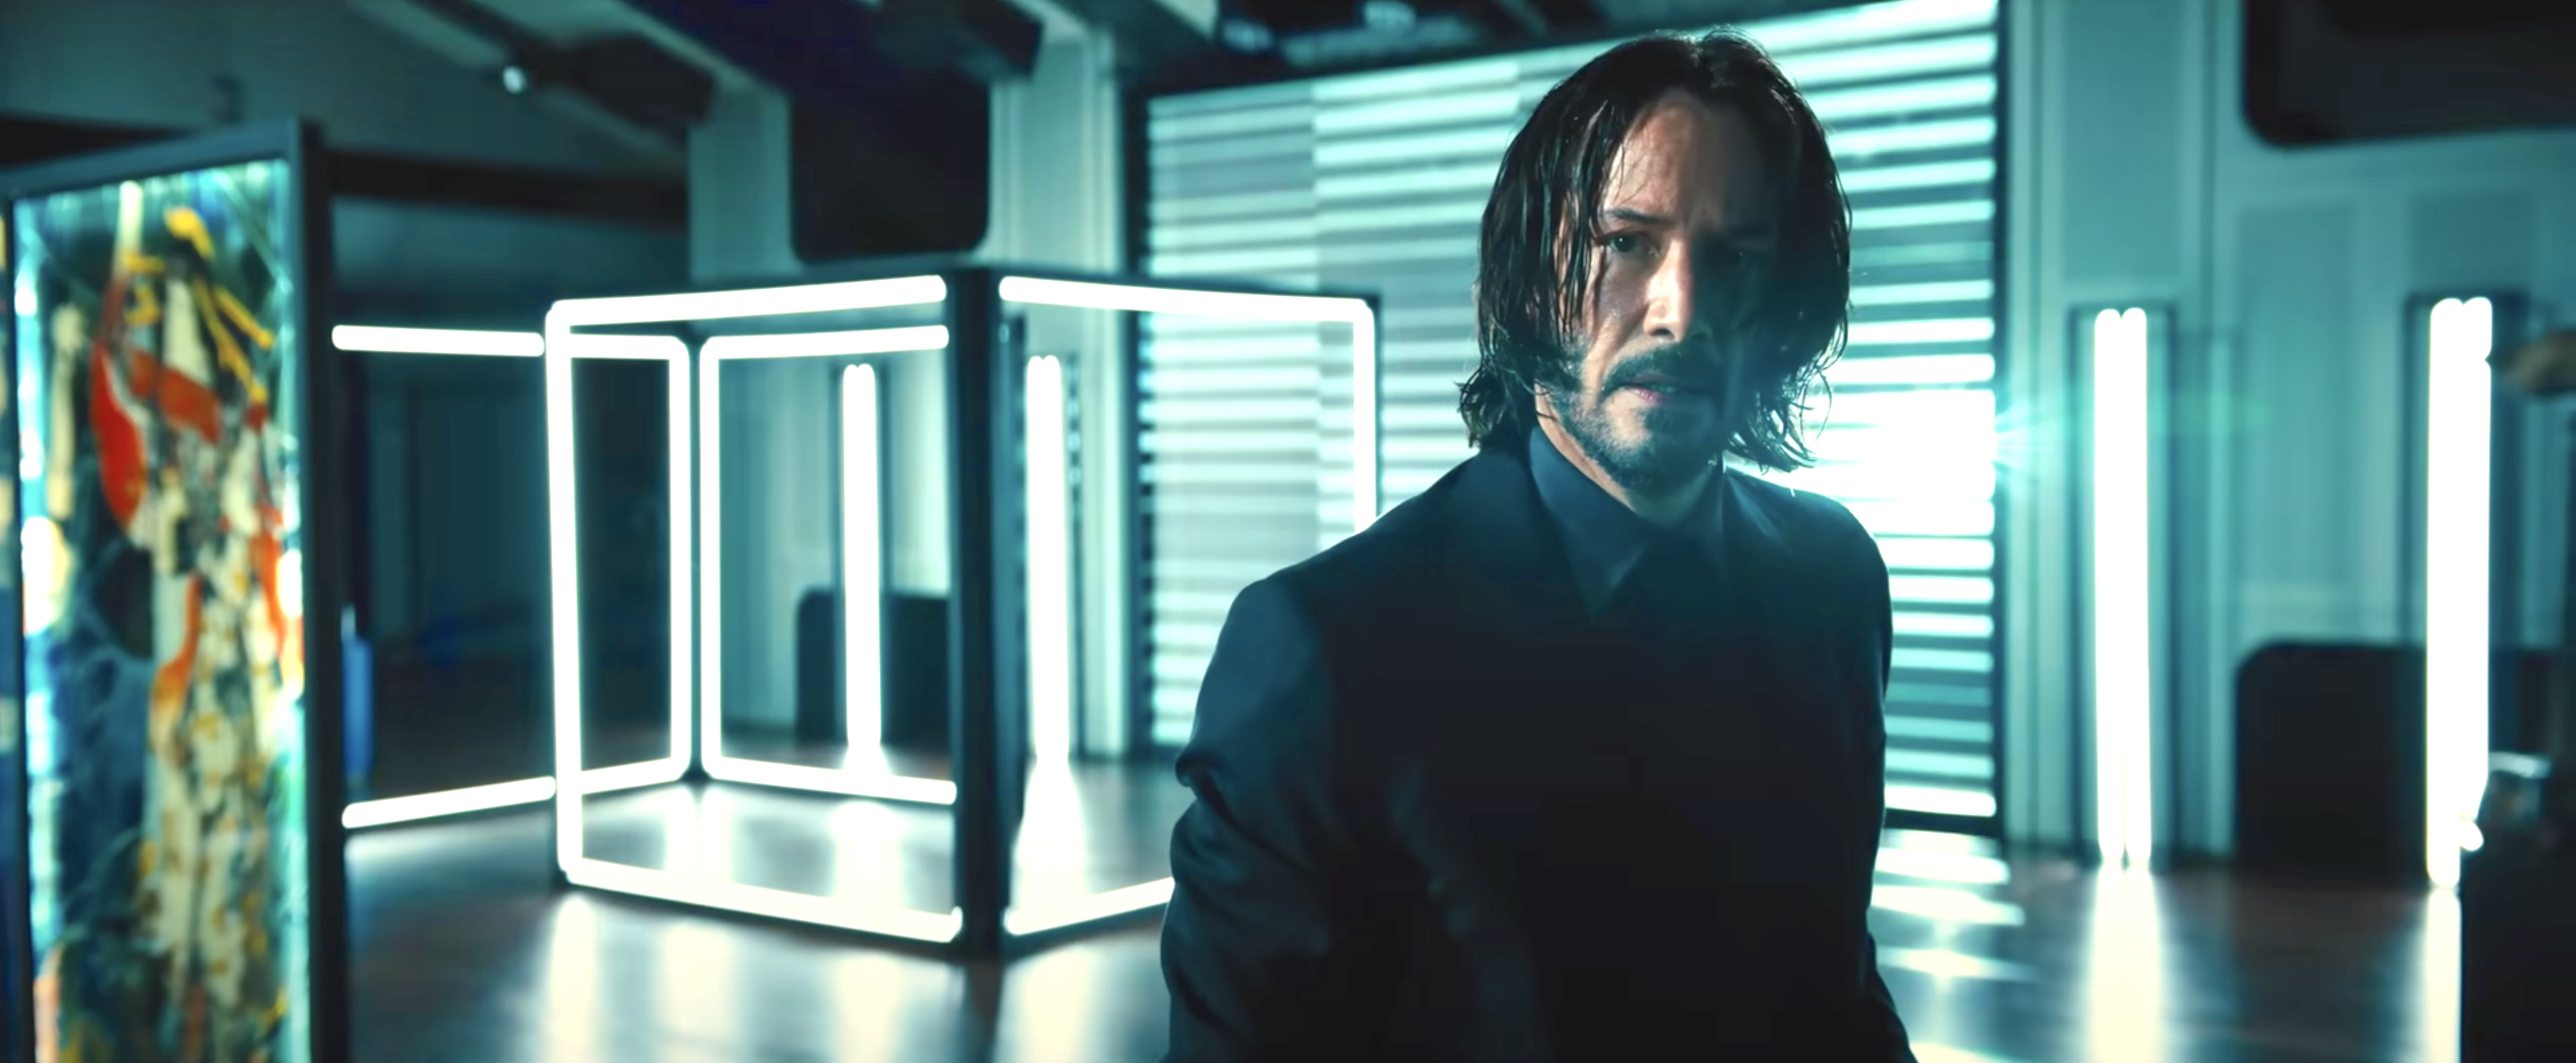 Keanu Reeves cut his hair, giving us the Matrix teaser we were waiting for  | British GQ